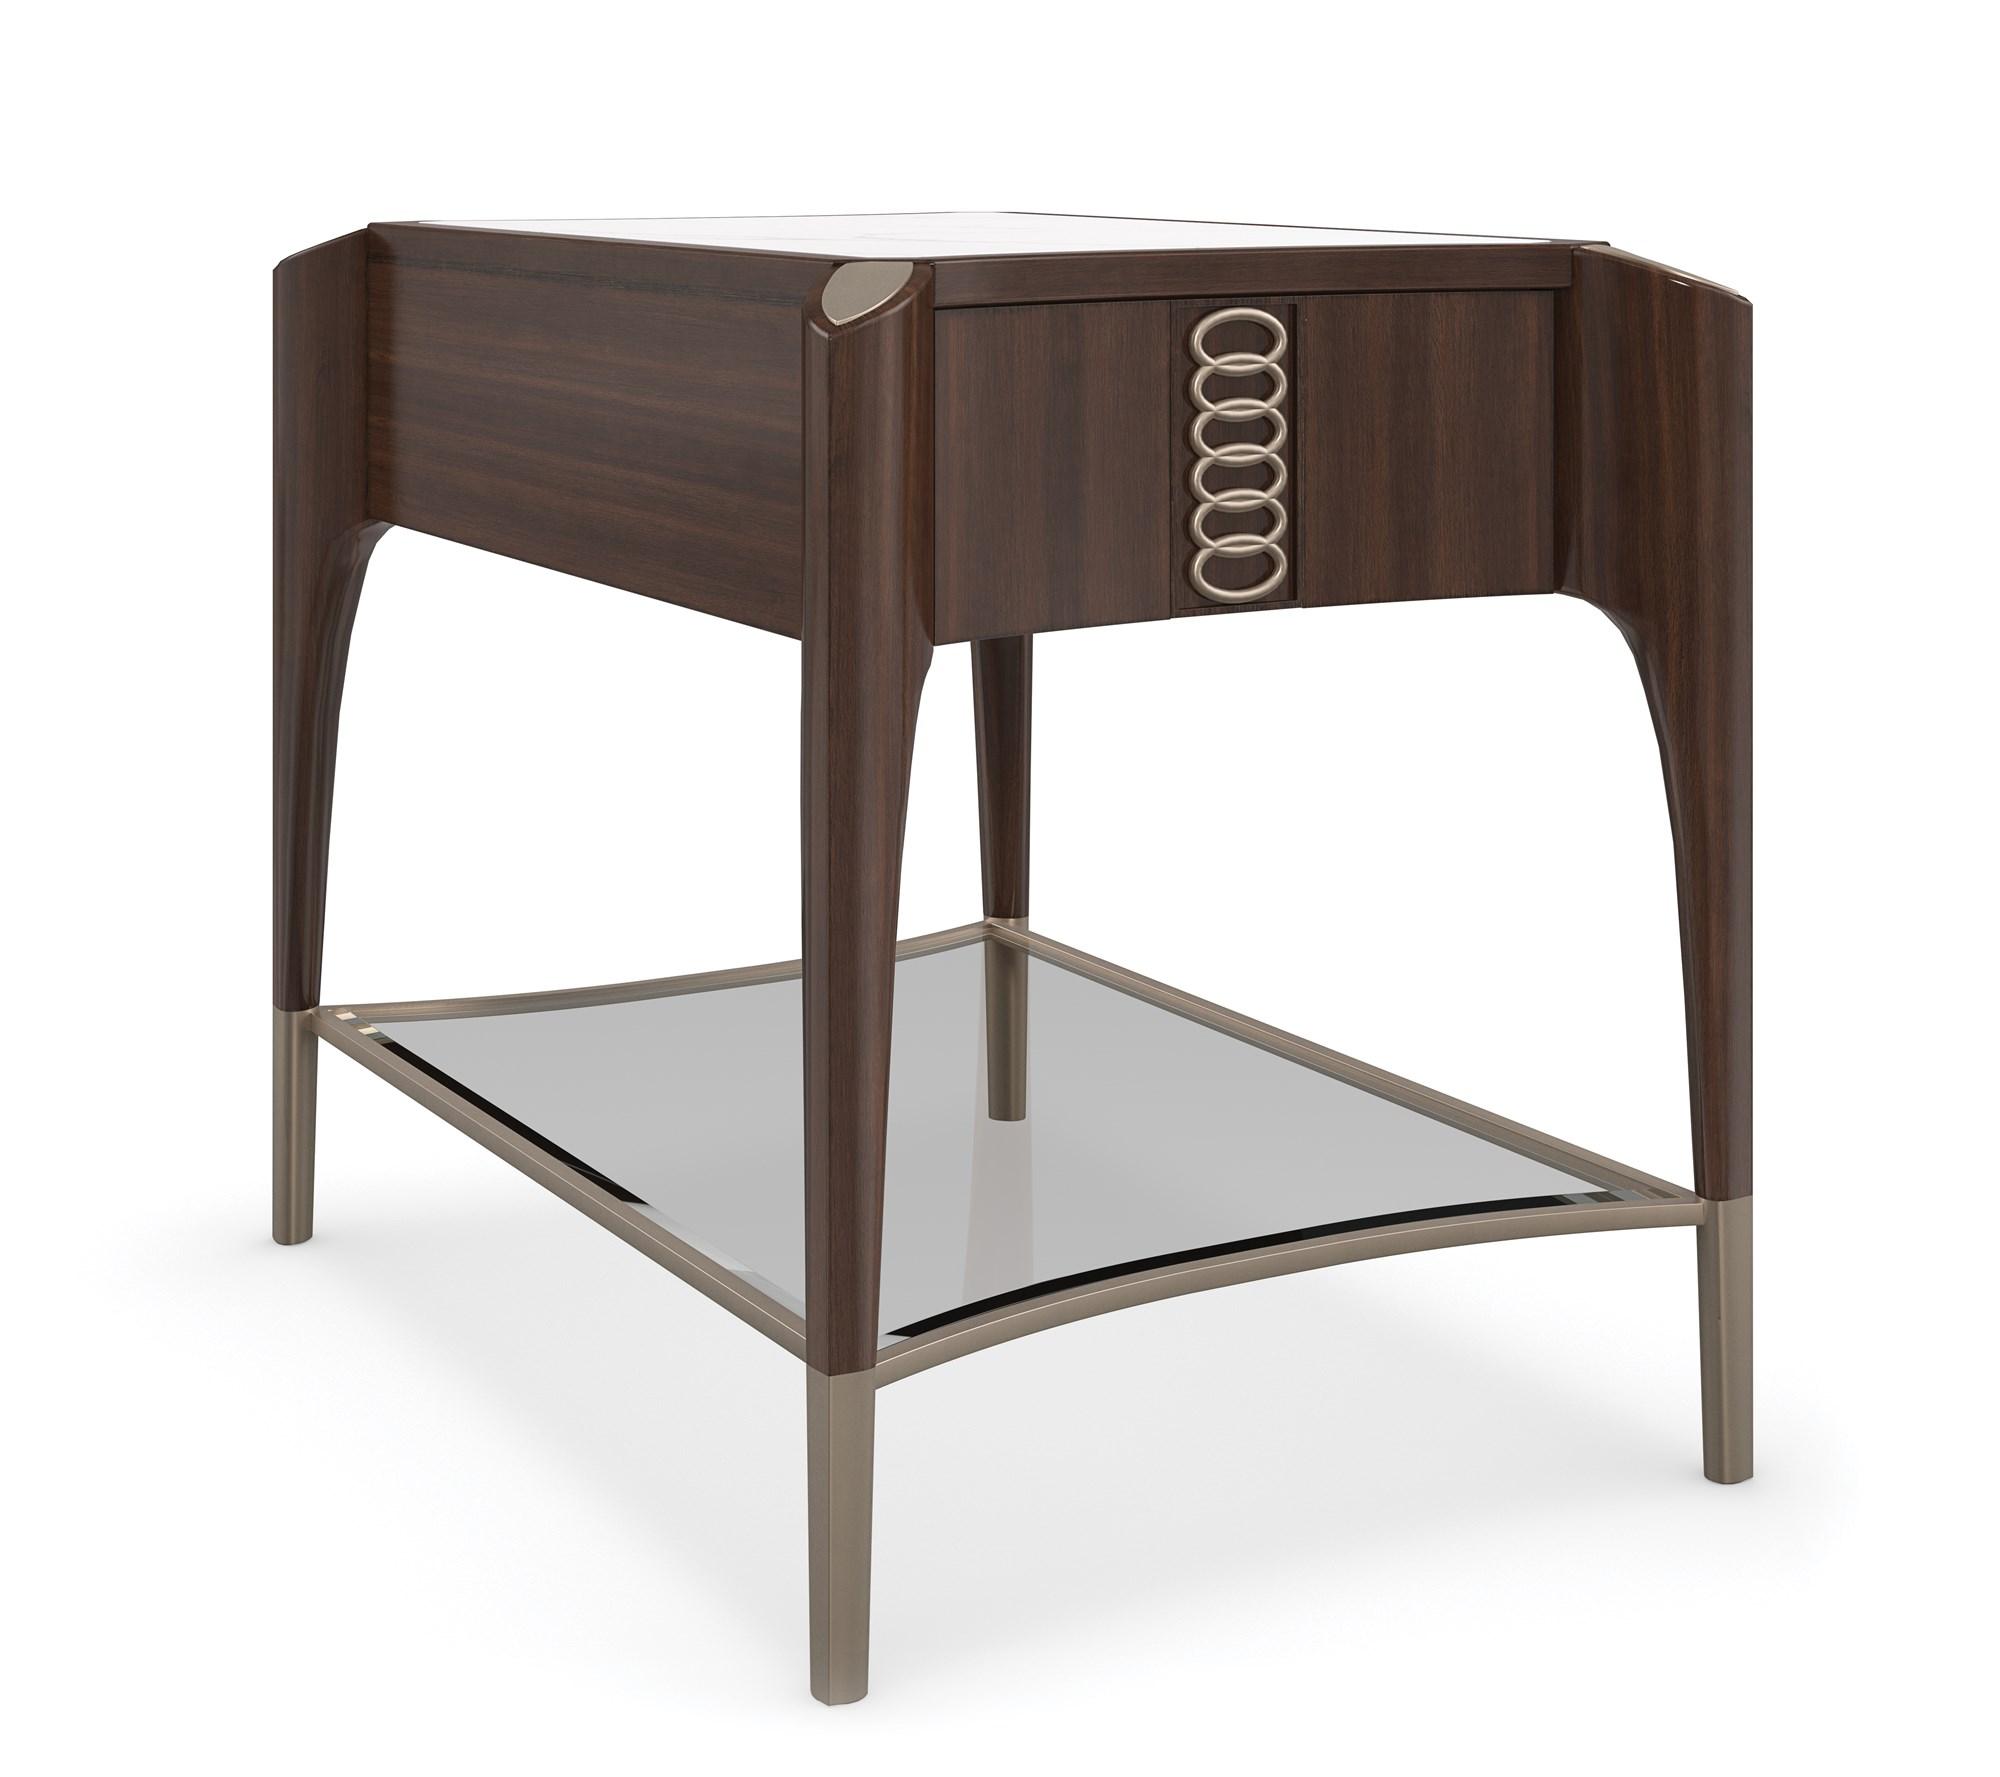 

    
Stallion, Afterglow, Pyrite Finish THE OXFORD RECTANGLE SIDE TABLE by Caracole
